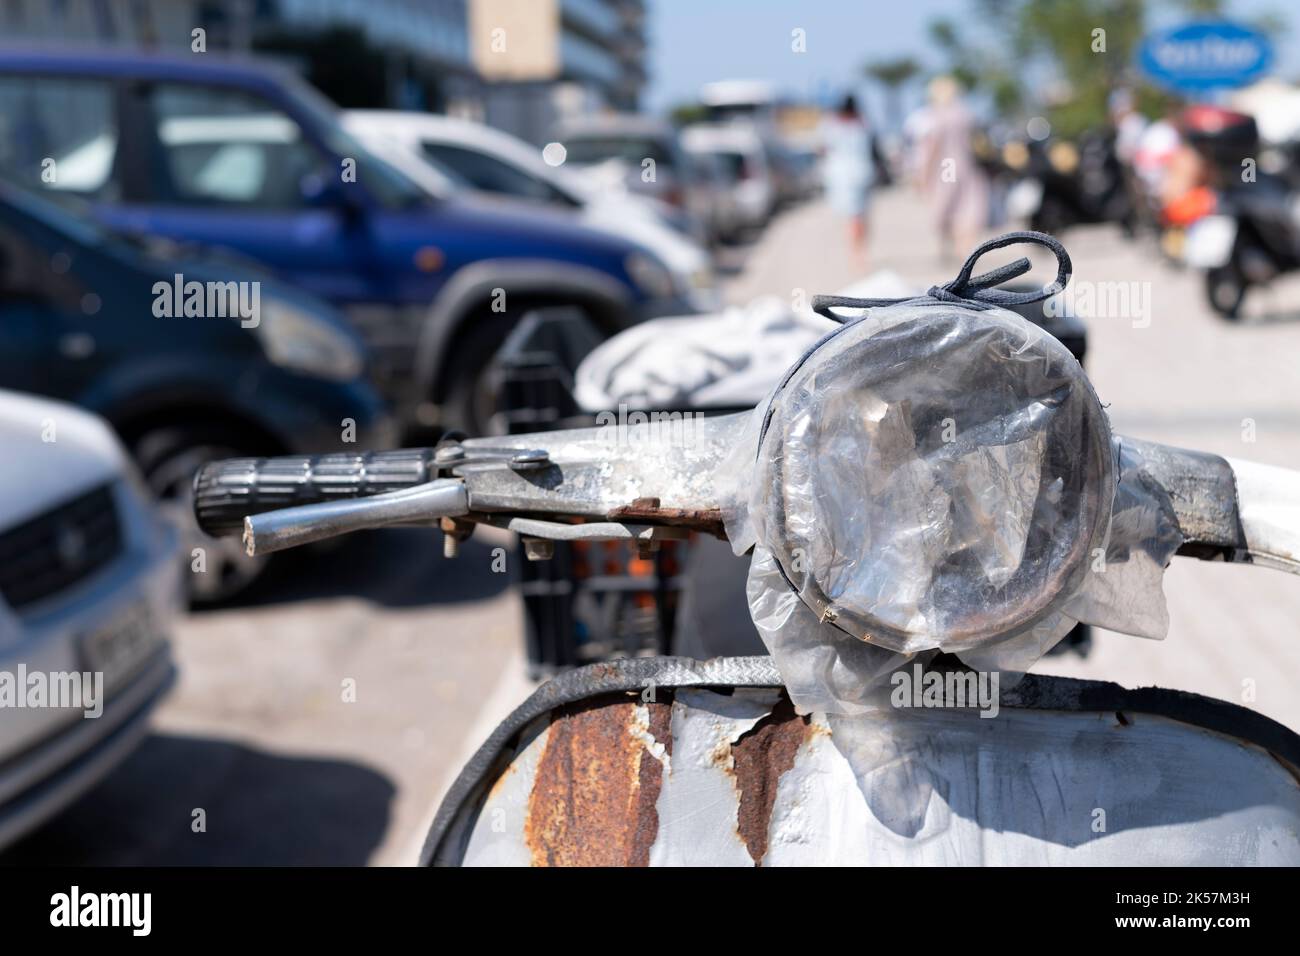 An old rusty motor scooter is parked on the roadside in Greece. The scooter has a broken headlight lens that is temporarily repaired with plastic bag Stock Photo